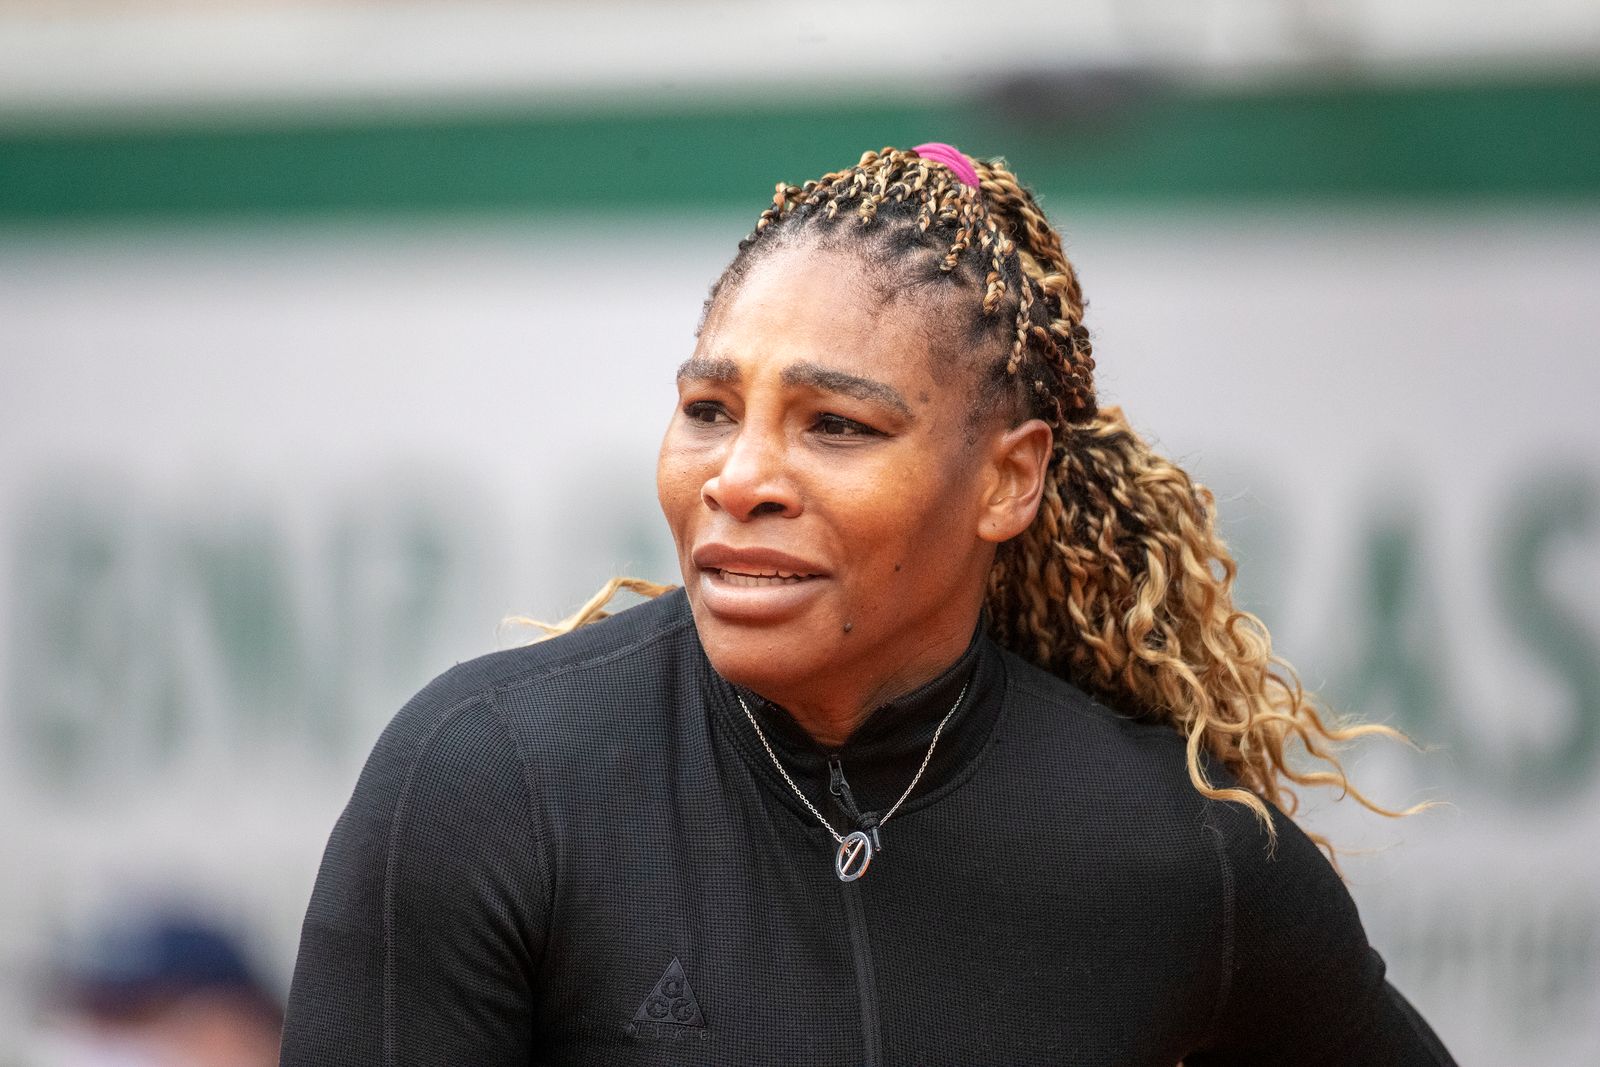 Serena Williams during the French Open Tennis Tournament at Roland Garros on September 28th 2020 | Getty Images